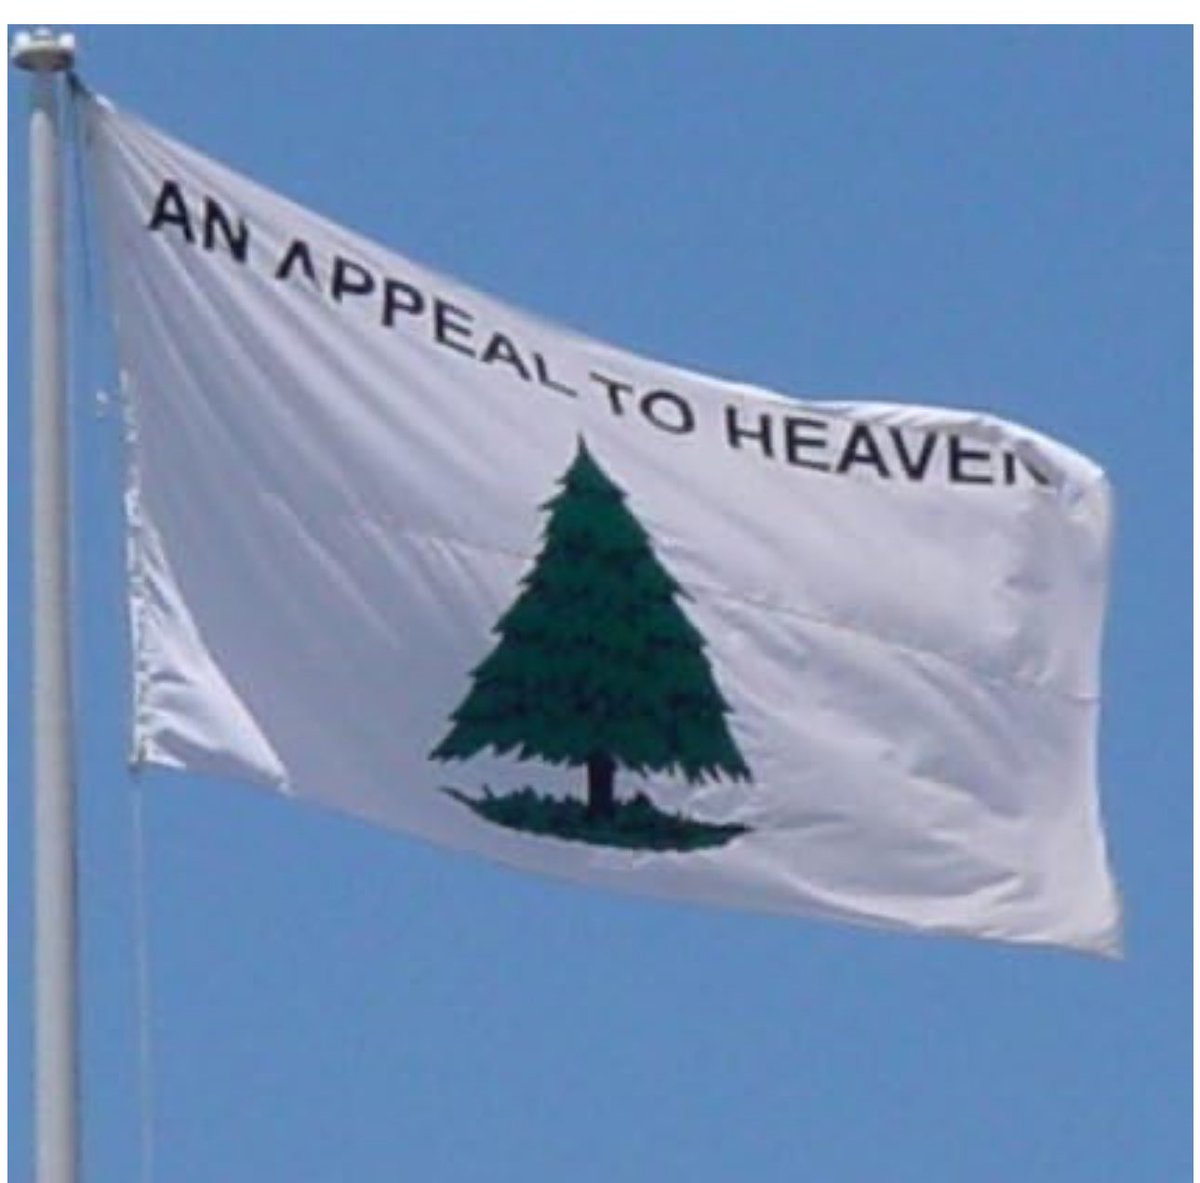 Appeal to Heaven means take your case to God. Why is the left in a tizzy about a Christian flag that symbolizes support for traditional values? Justice Alito and his wife should be applauded for their willingness to publicly stand for Judeo-Christian values. The Left is willing